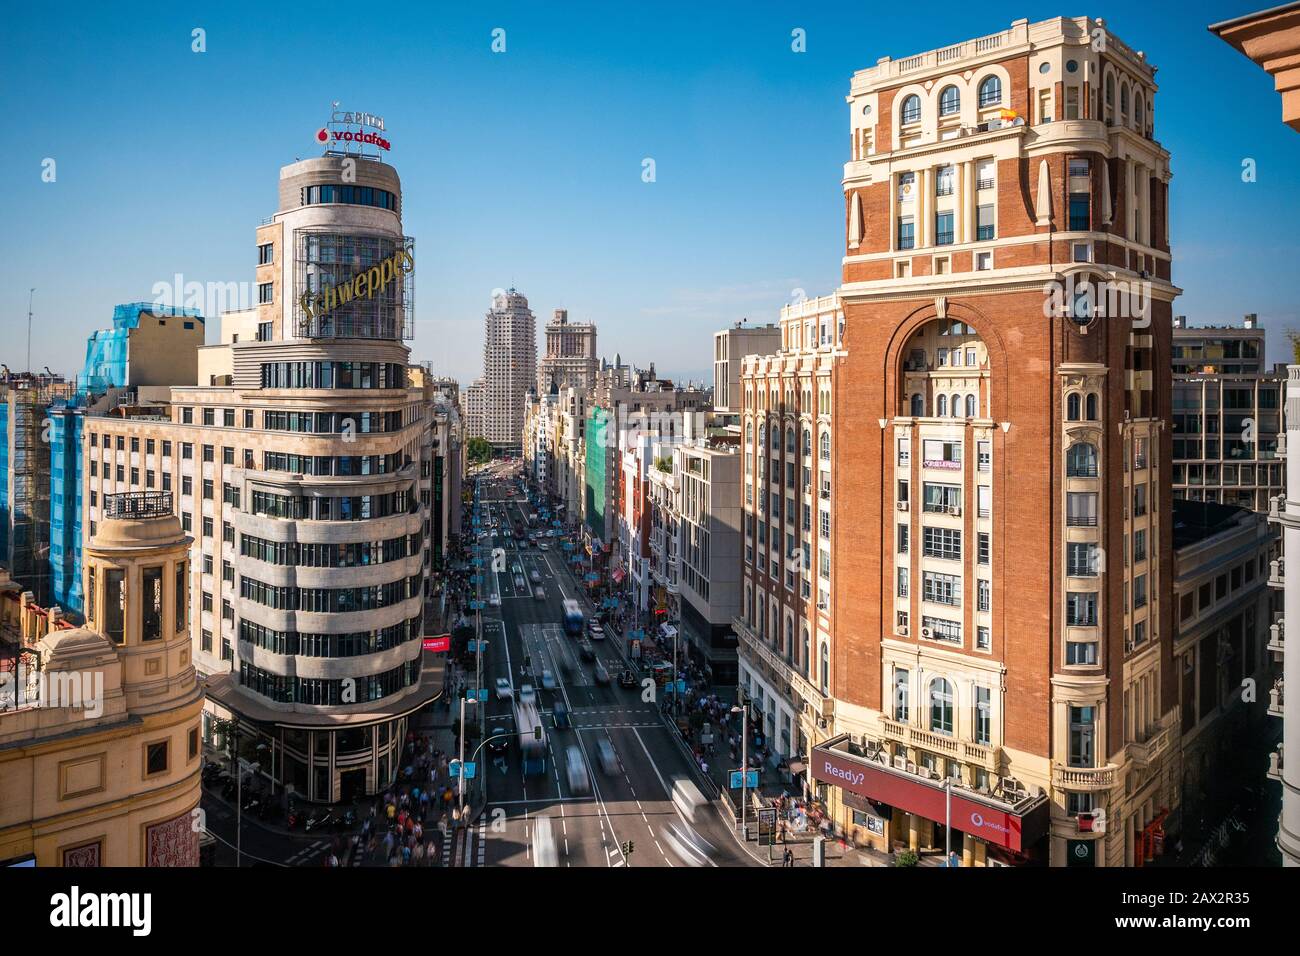 Landmark buildings and traffic on Gran Via street in Central Madrid, the capital and largest city in Spain. Stock Photo